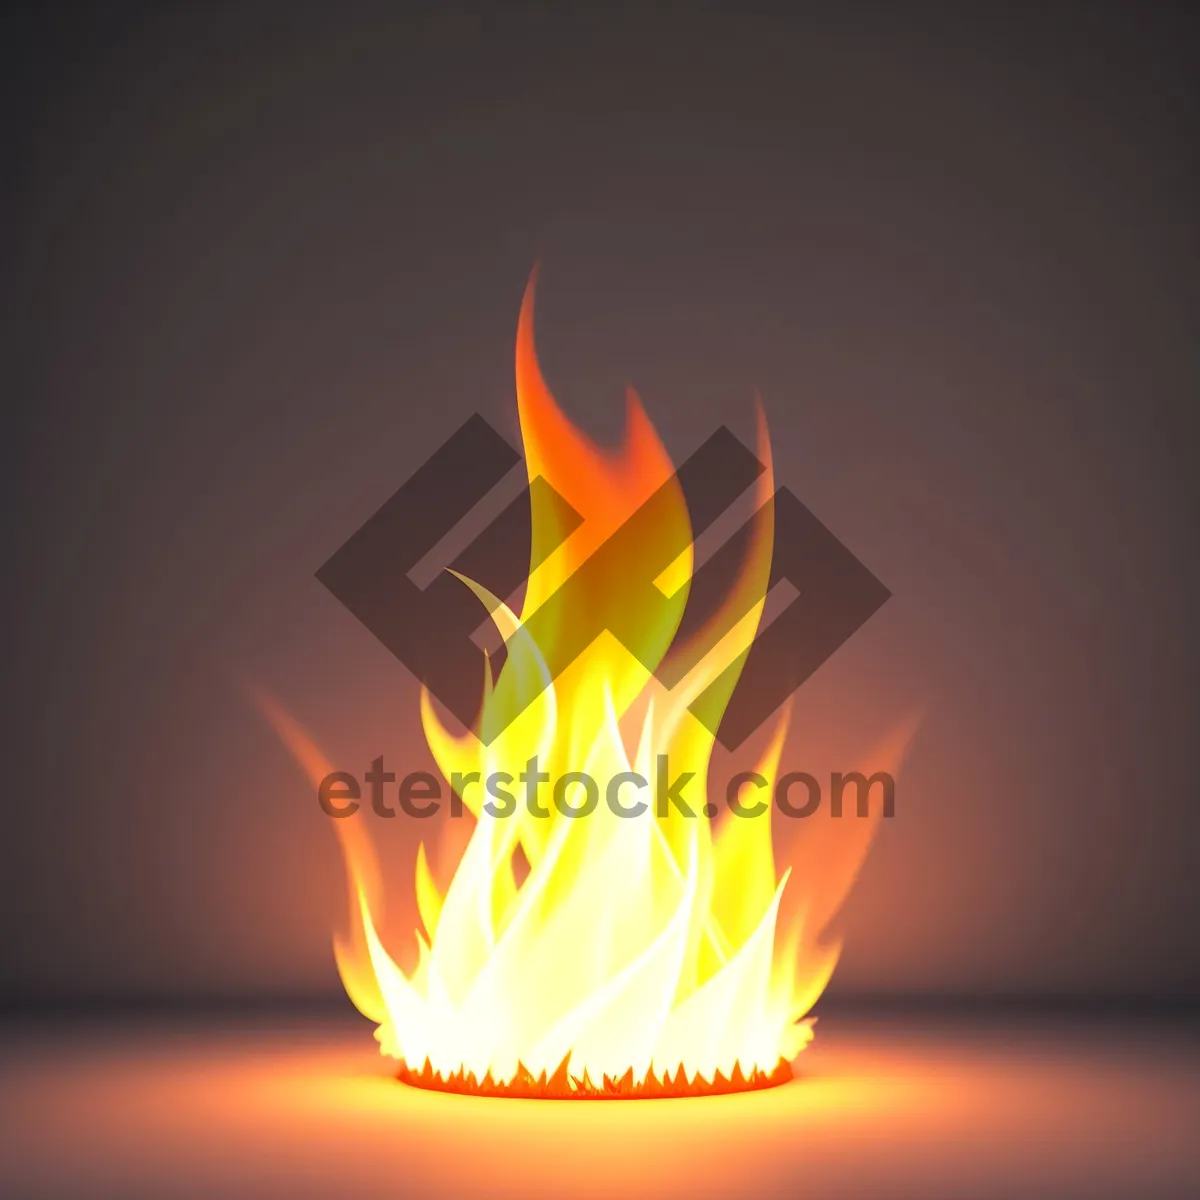 Picture of Blazing Heat: Iconic Symbol of Fire's Shiny Light